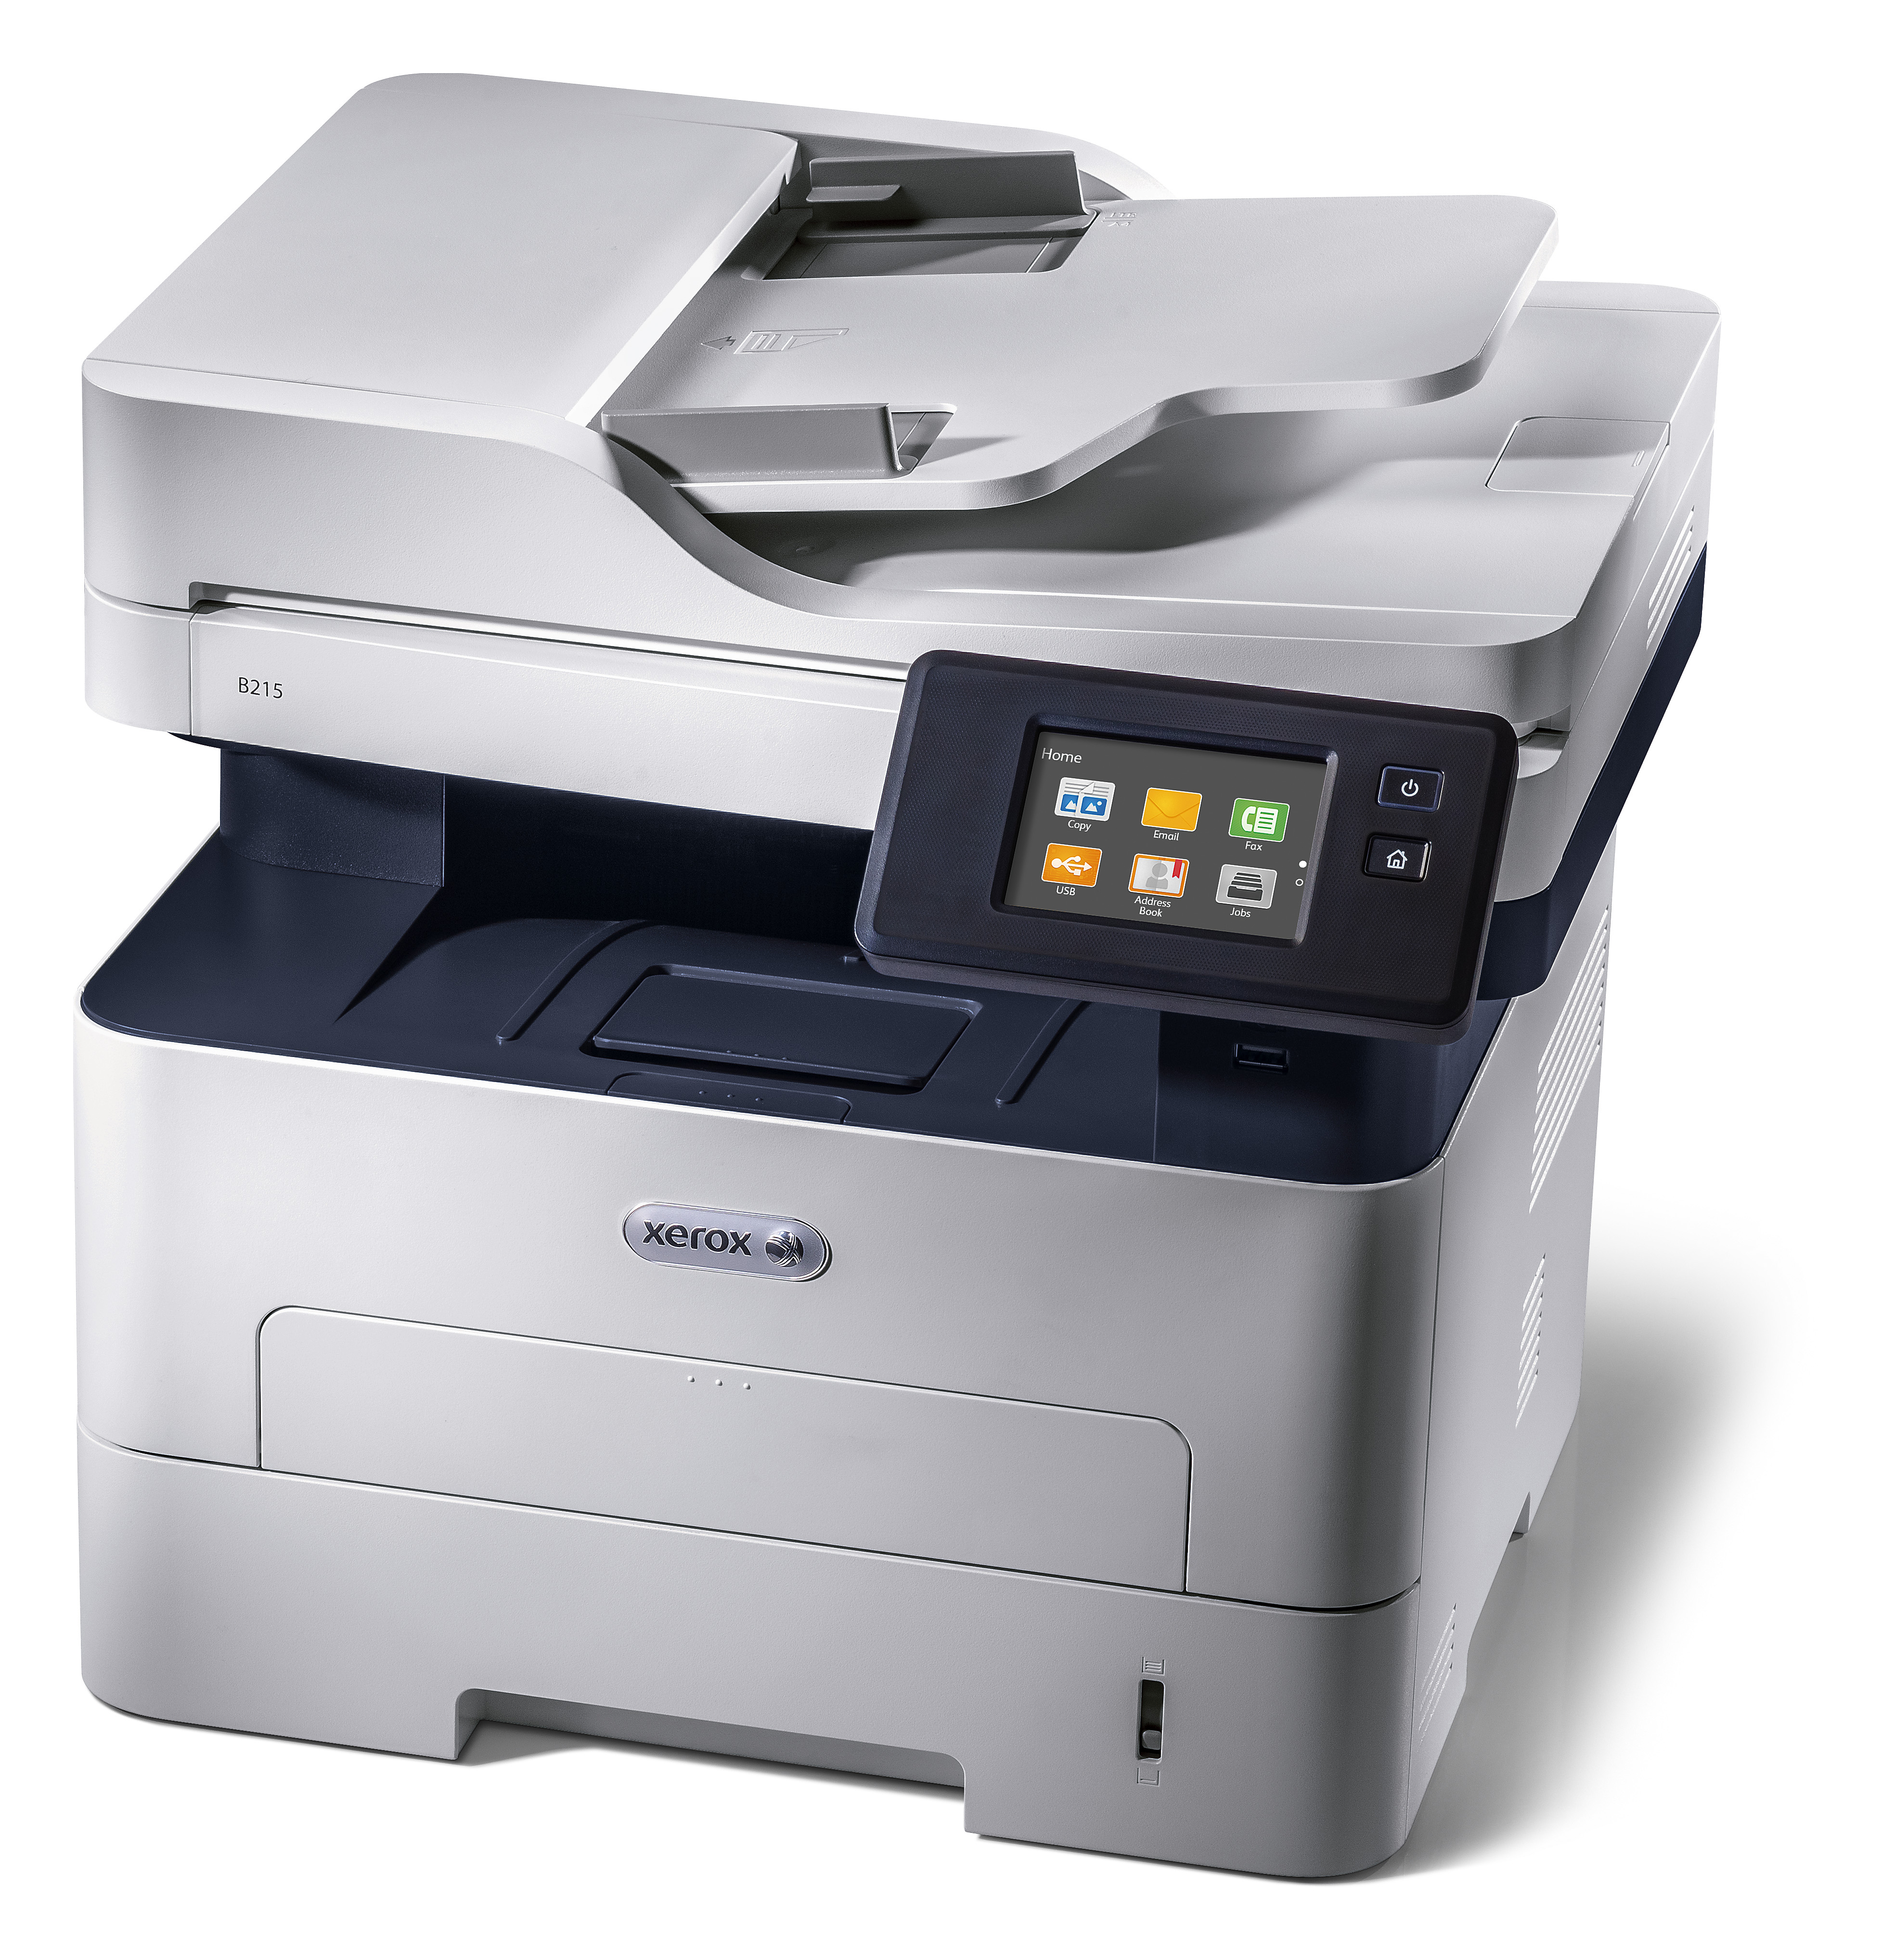 Xerox Launches Suite Of Compact Multifunction Printers With Wifi